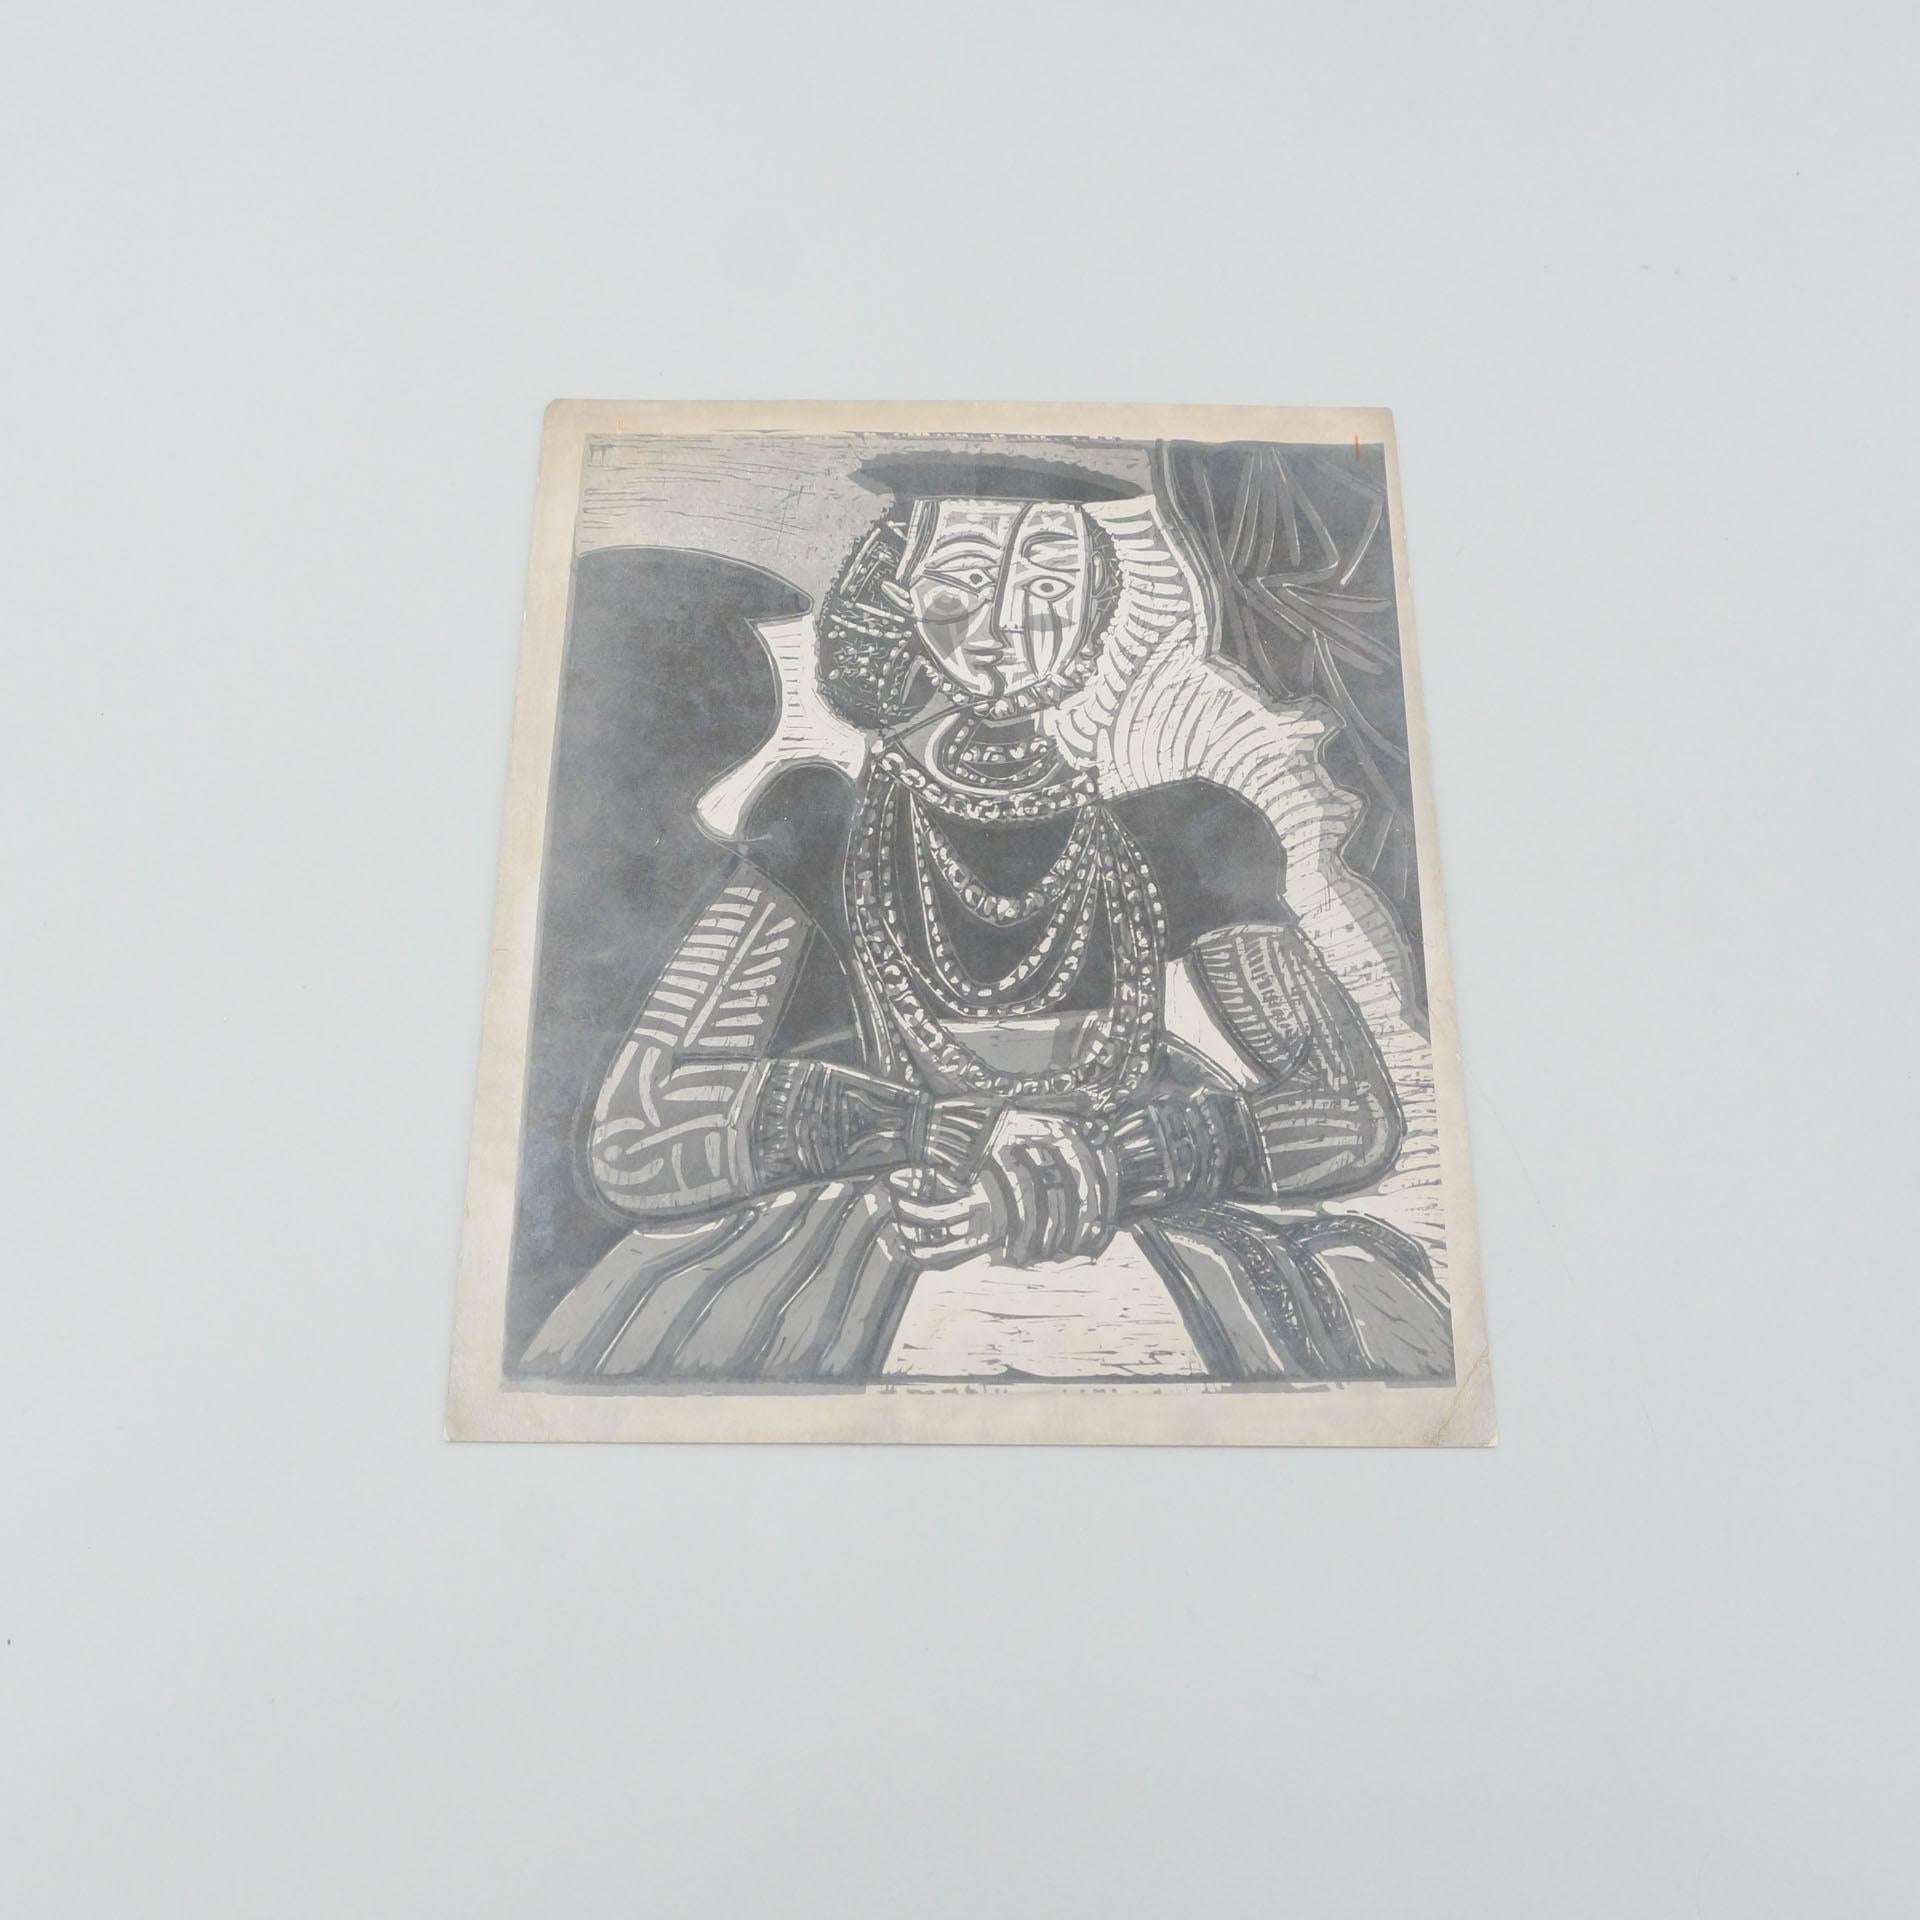 Black and white photography of Picasso Linocut 'Bust the Femme D'Apres Cranach Le Jeune' by Richard J.Misch from 1972.

In original condition, with minor wear consistent with age and use, preserving a beautiful